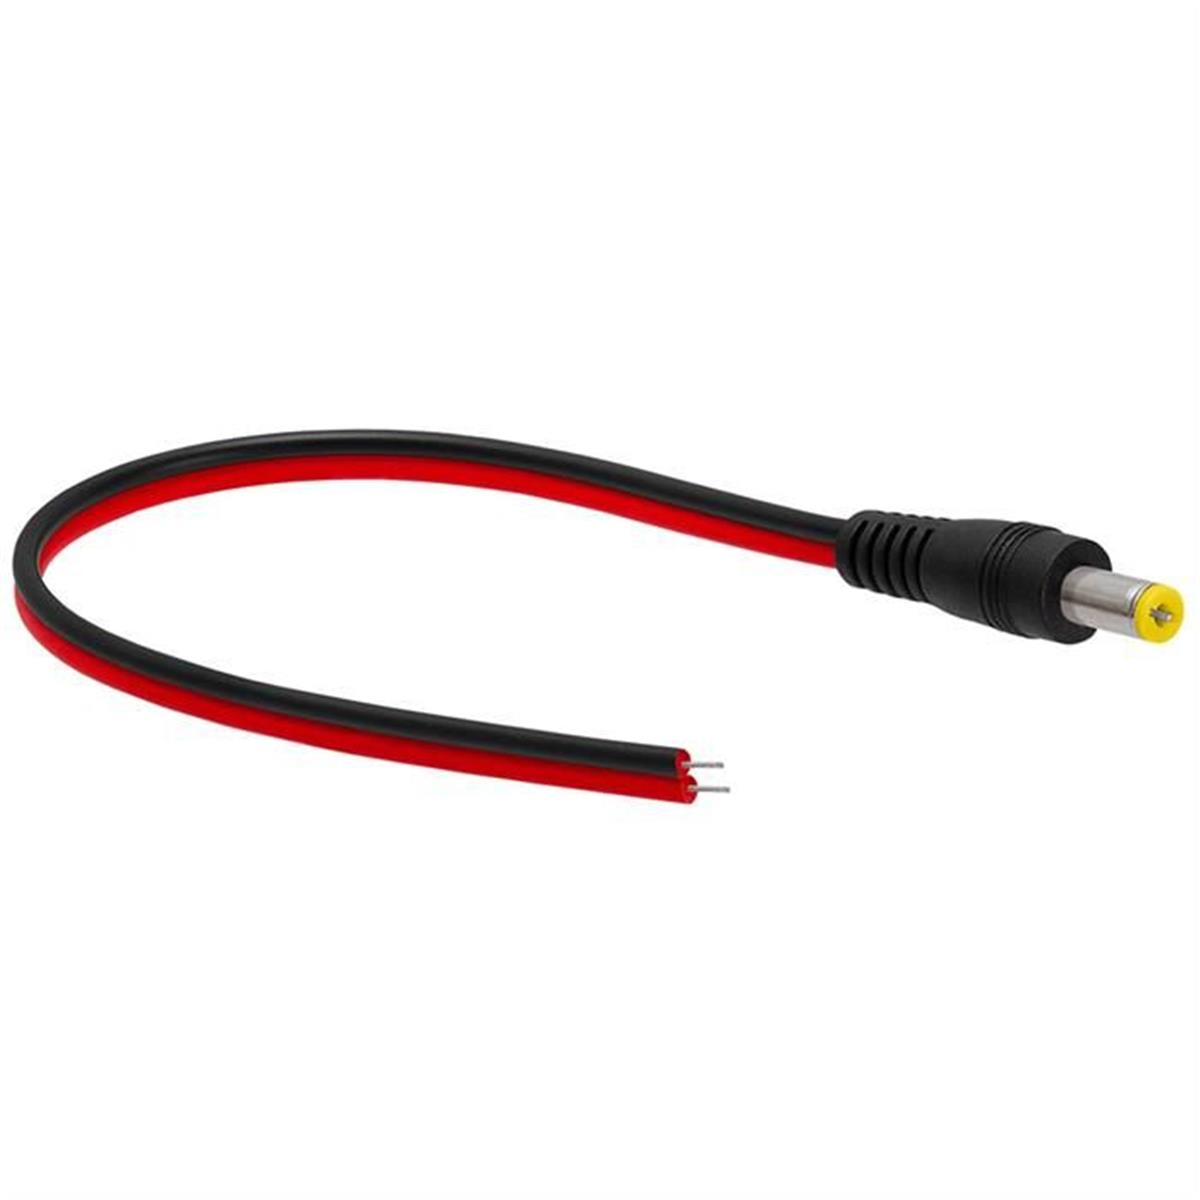 Picture of CMPLE 1277-N CCTV Male Power Lead Cable Connector for Security Cameras